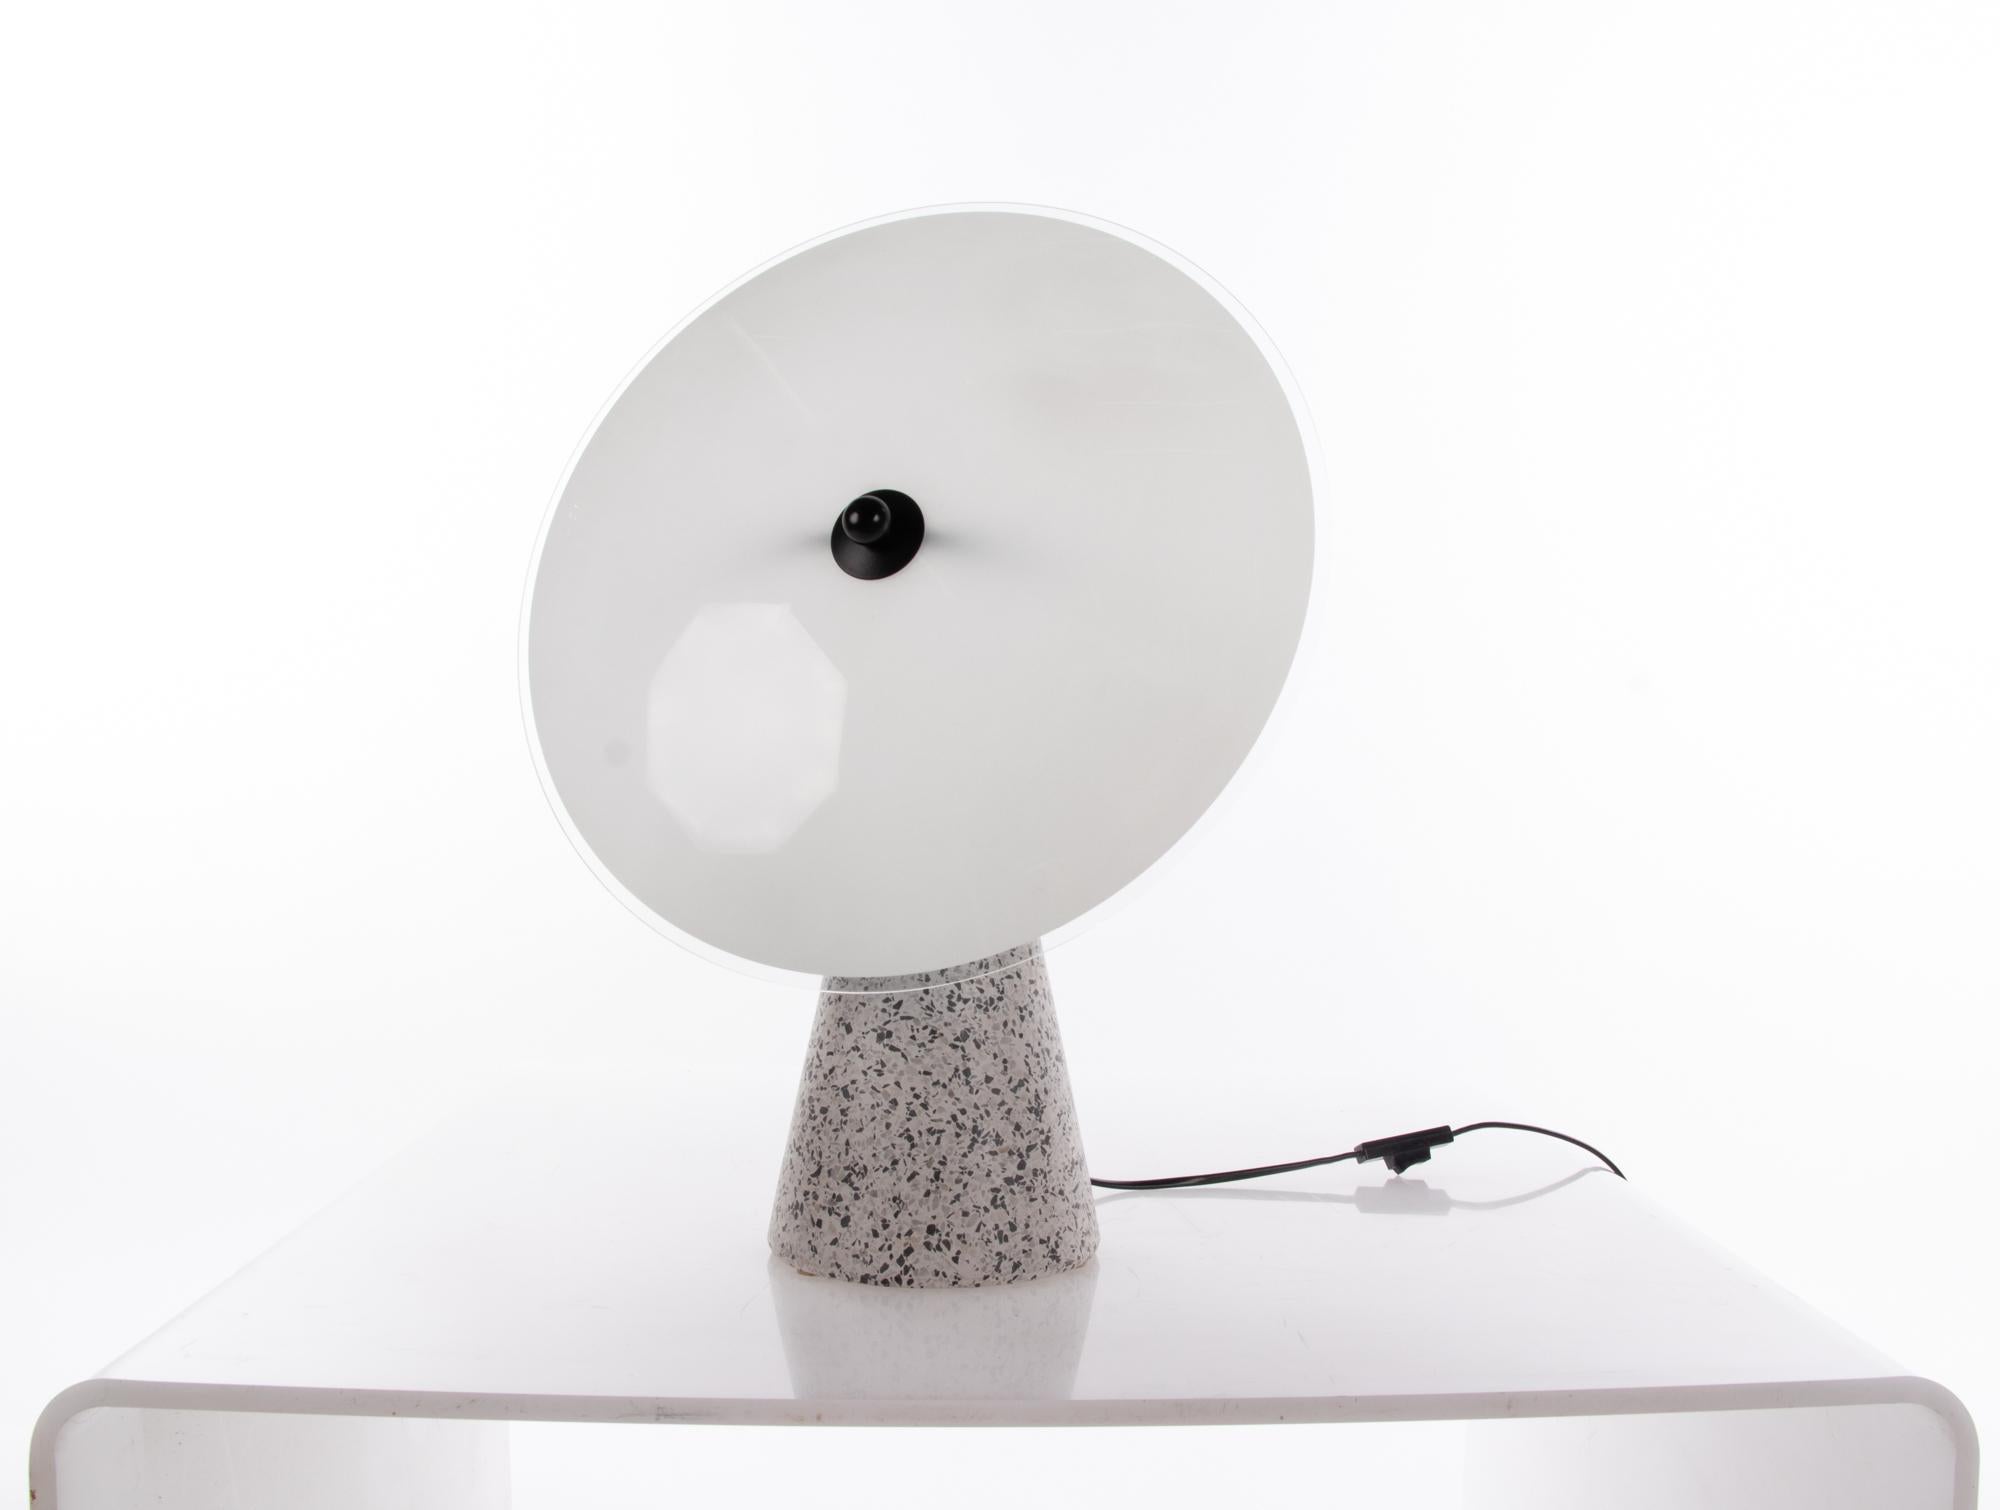 Elegant postmodern table lamp made in Sweden and produced for Ikea in the 1990s. The base is made of real Terrazzo material and the shade of the lamp is made of milk glass. 

Measures: height 15